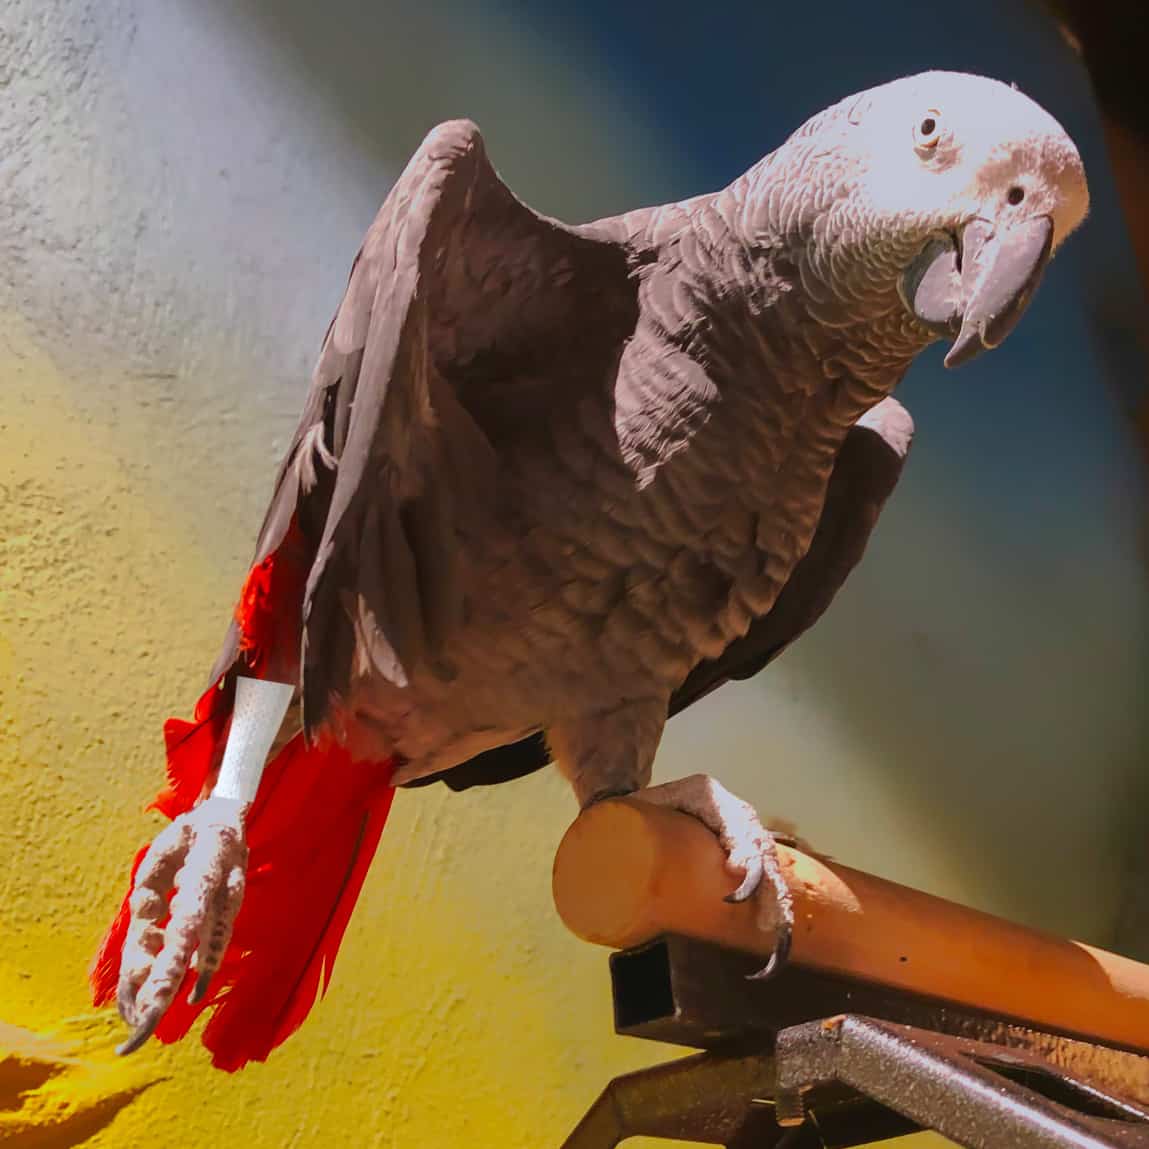 How She Cared For Her African Greys Fractured Leg Bone